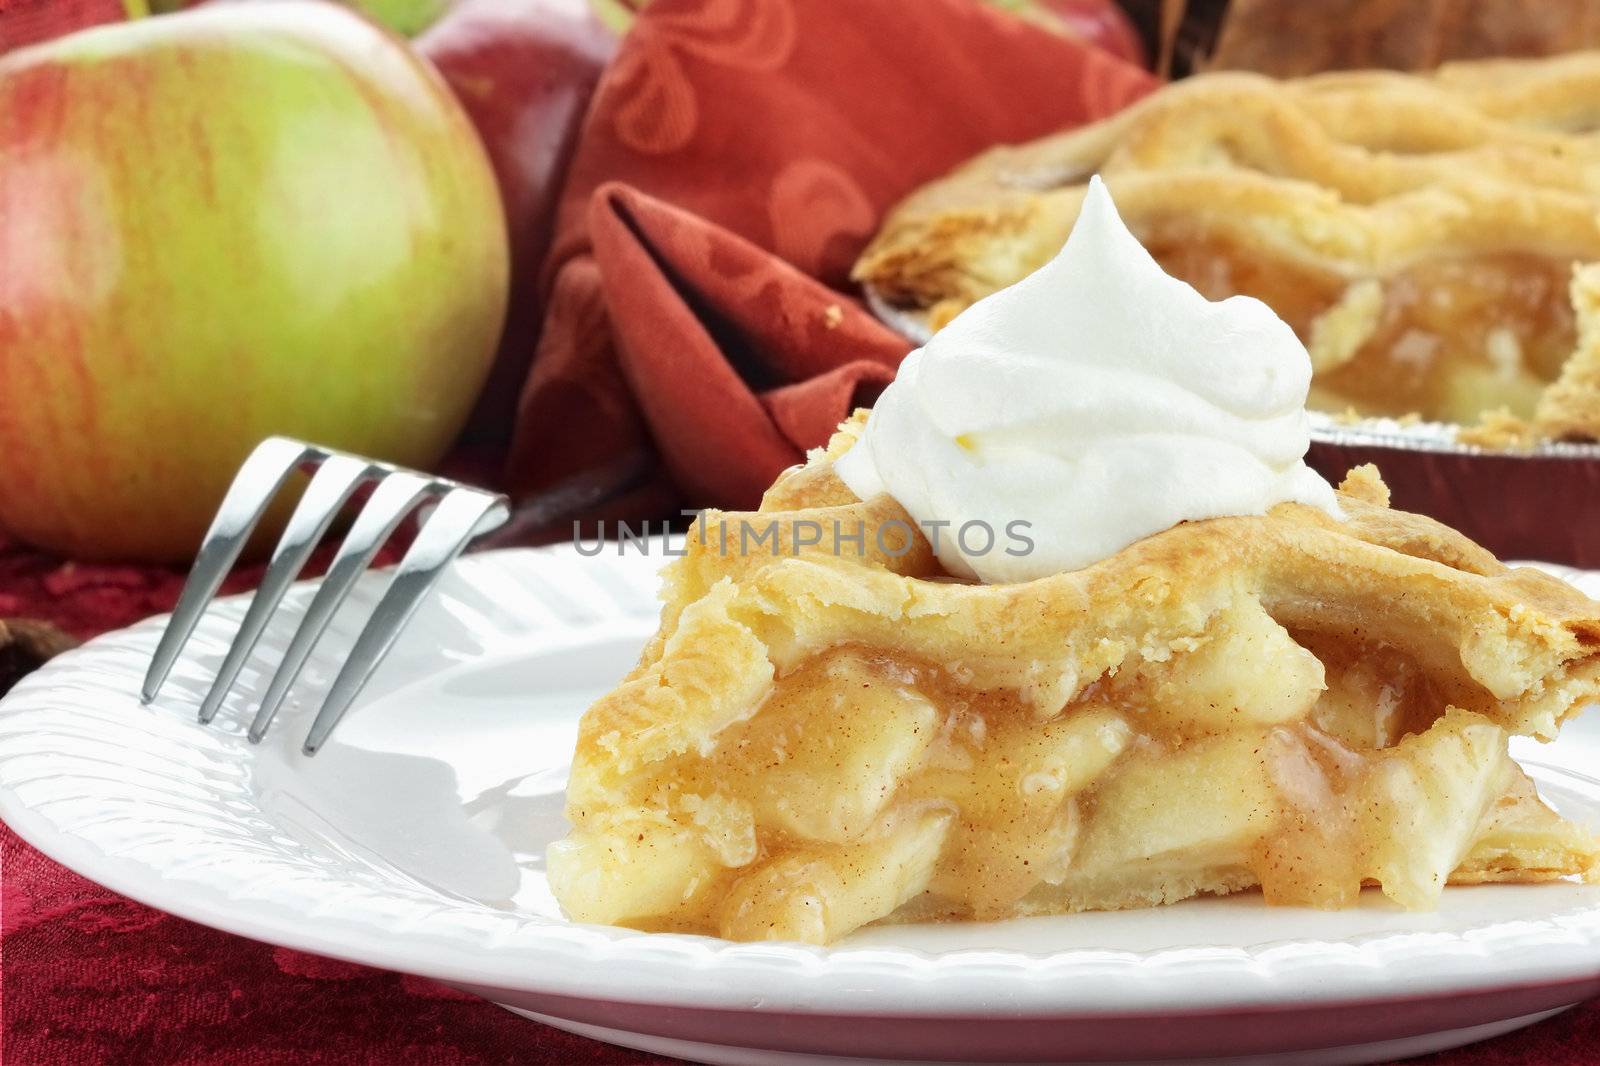 Slice of delicious fresh baked apple pie with whipped cream. Extreme shallow depth of field with selective focus on slice of pie.